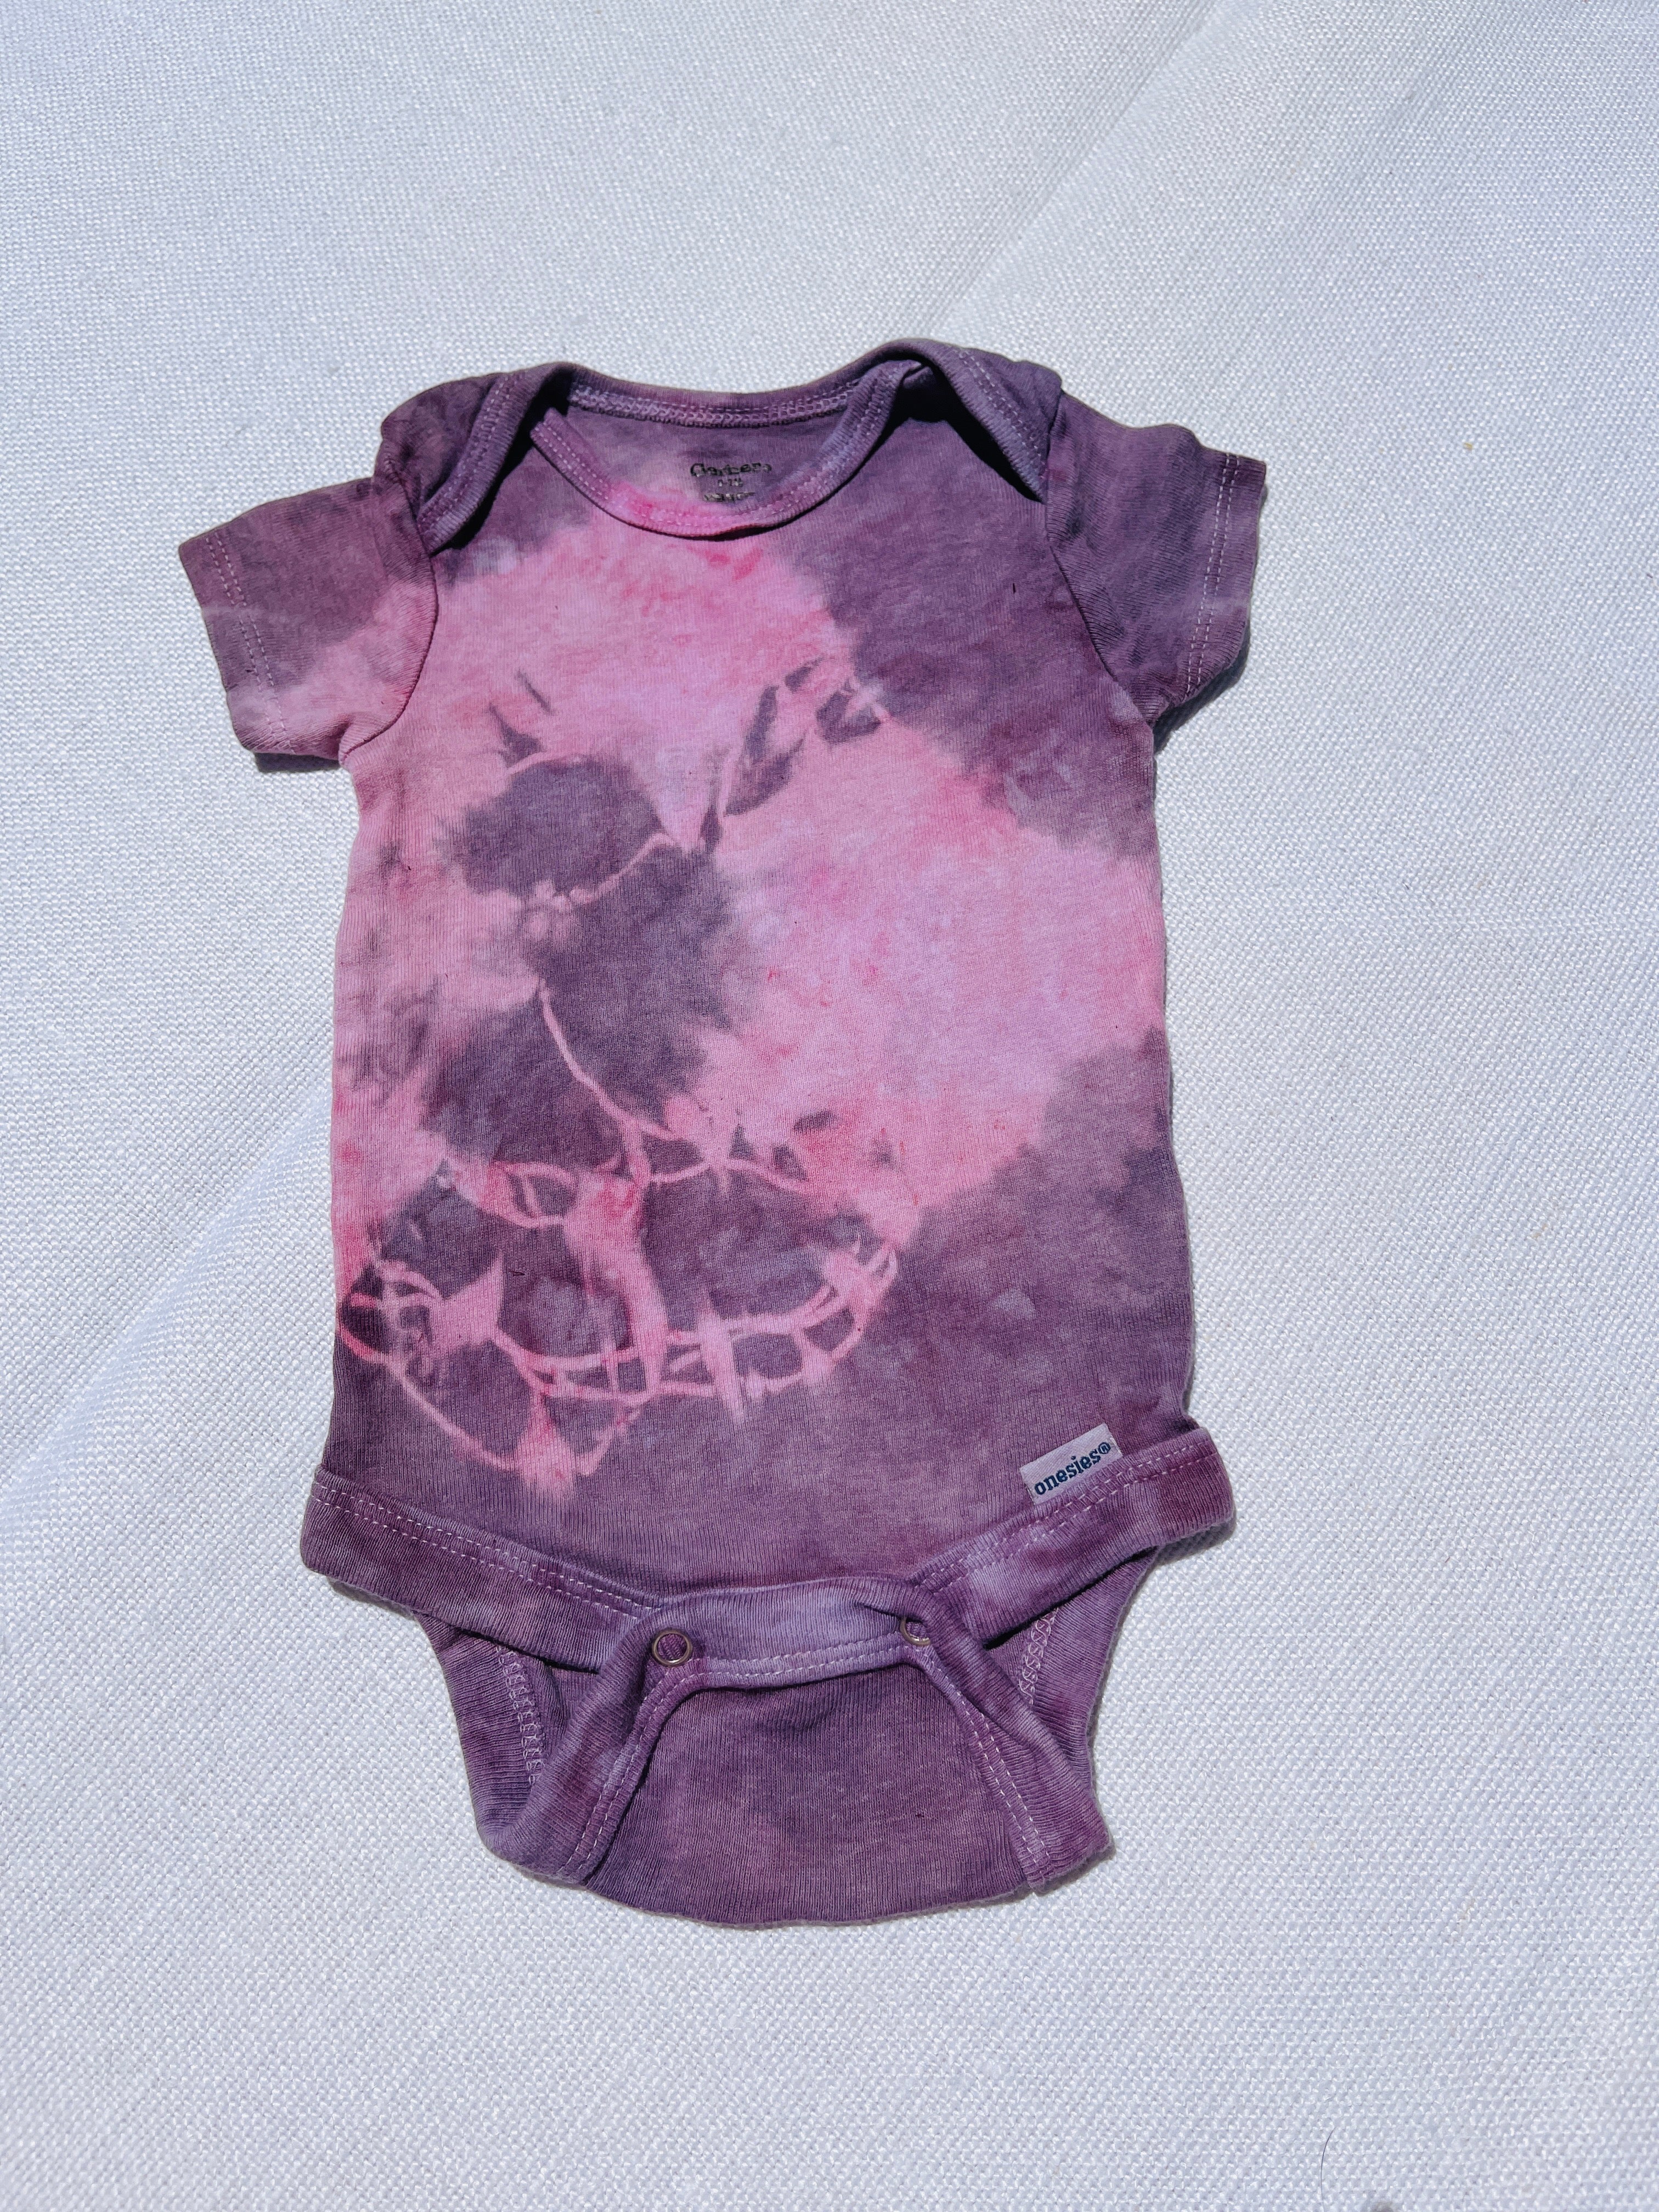 plant dyed cotton baby onesie 0-3m - earthen yourself